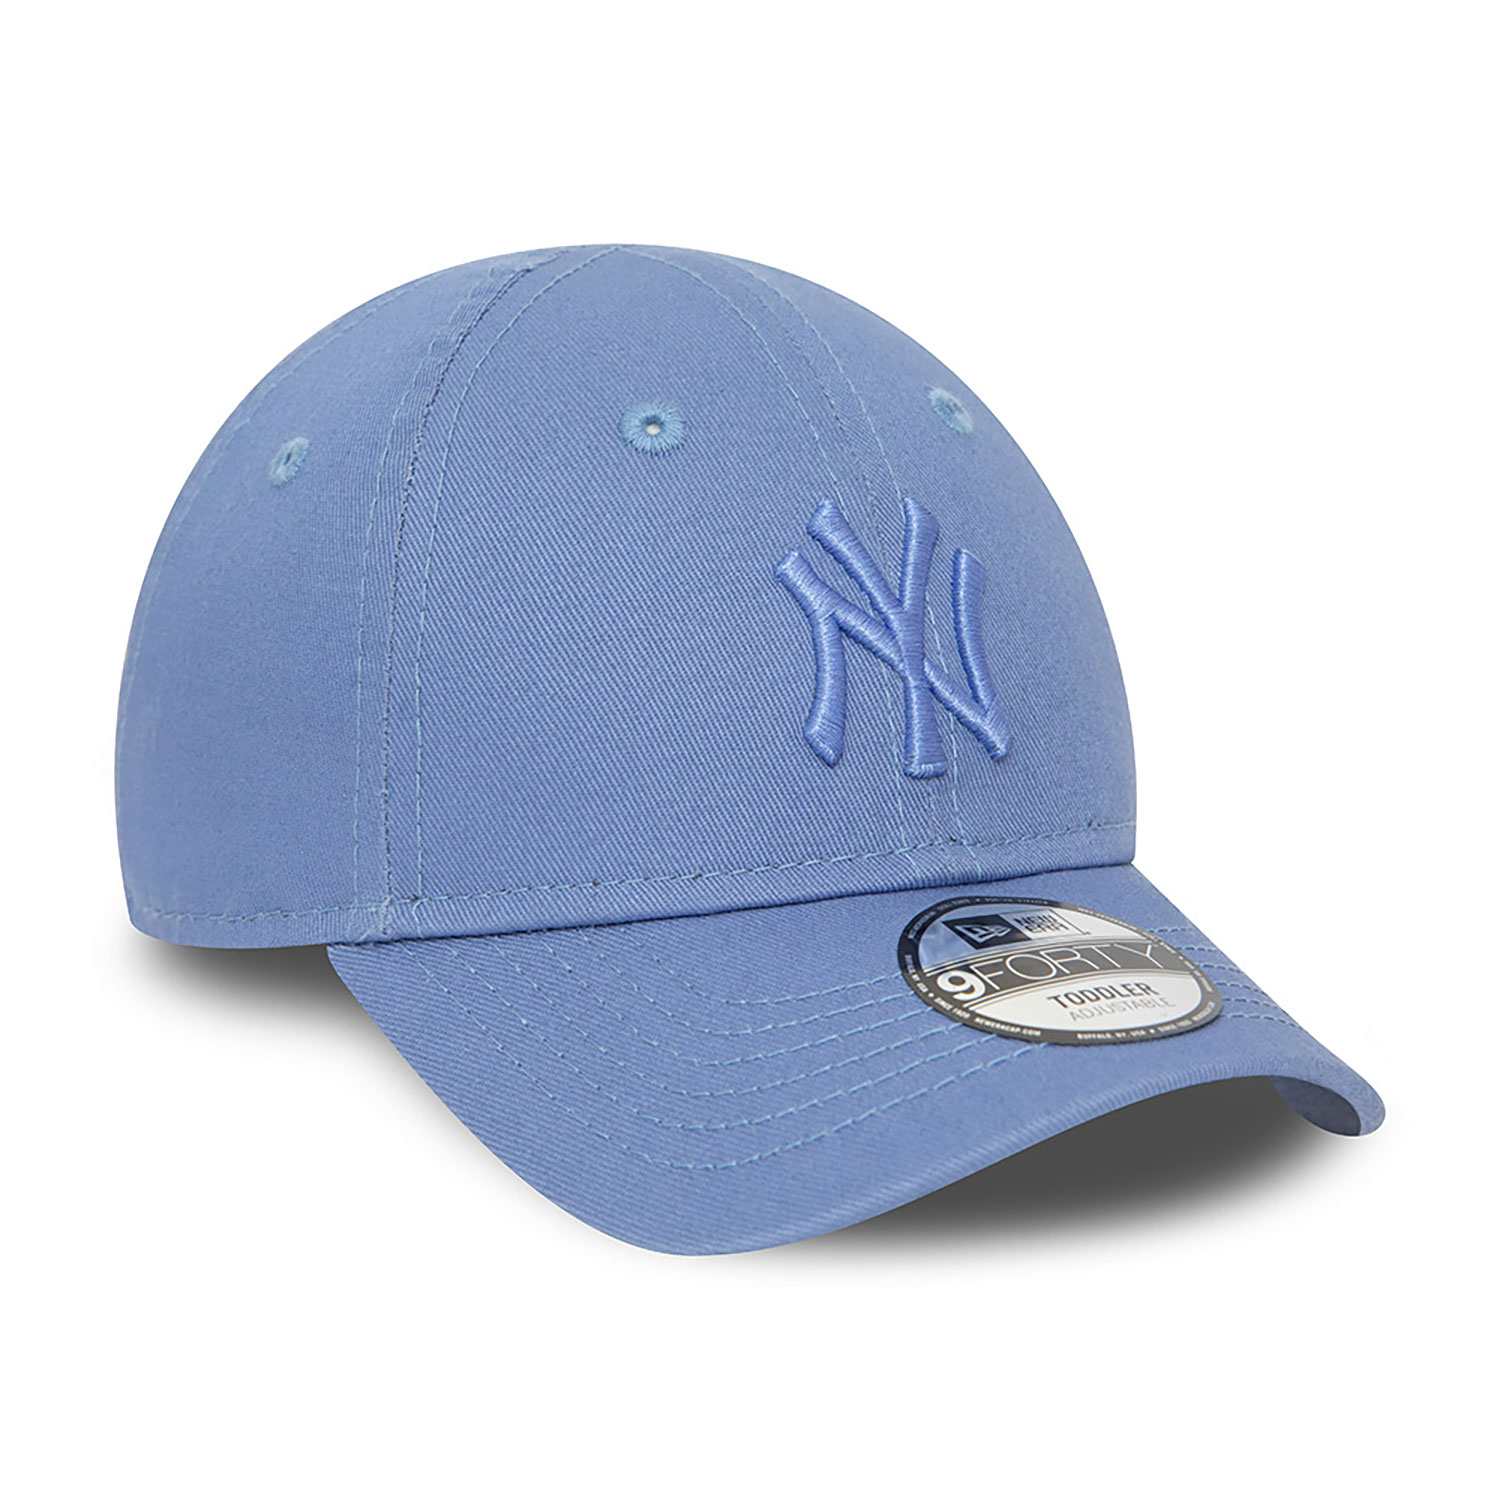 New York Yankees Toddler League Essential Blue 9FORTY Adjustable Cap